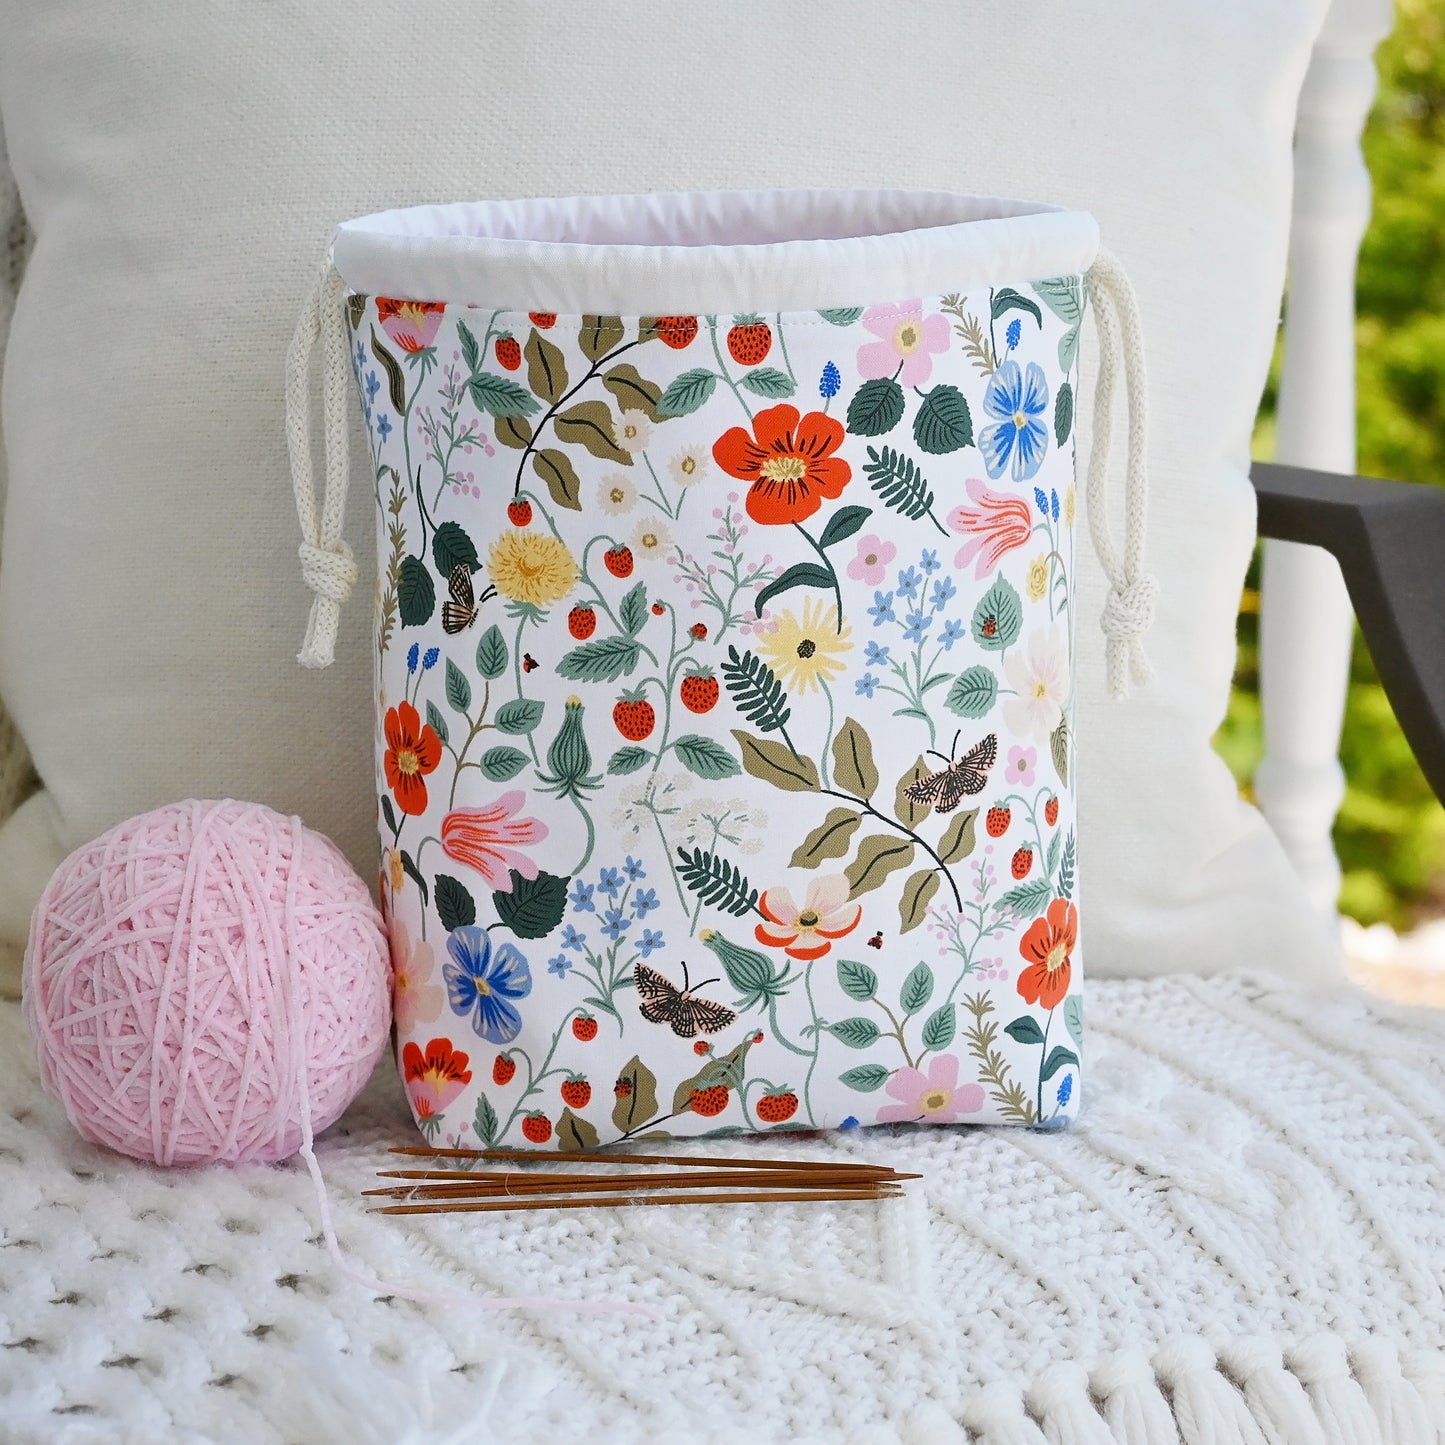 Small drawstring knitting bag with pockets.  Made from Rifle Paper Co Strawberry Fields Fabric.  Made in Nova Scotia, Canada by Yellow Petal Handmade.